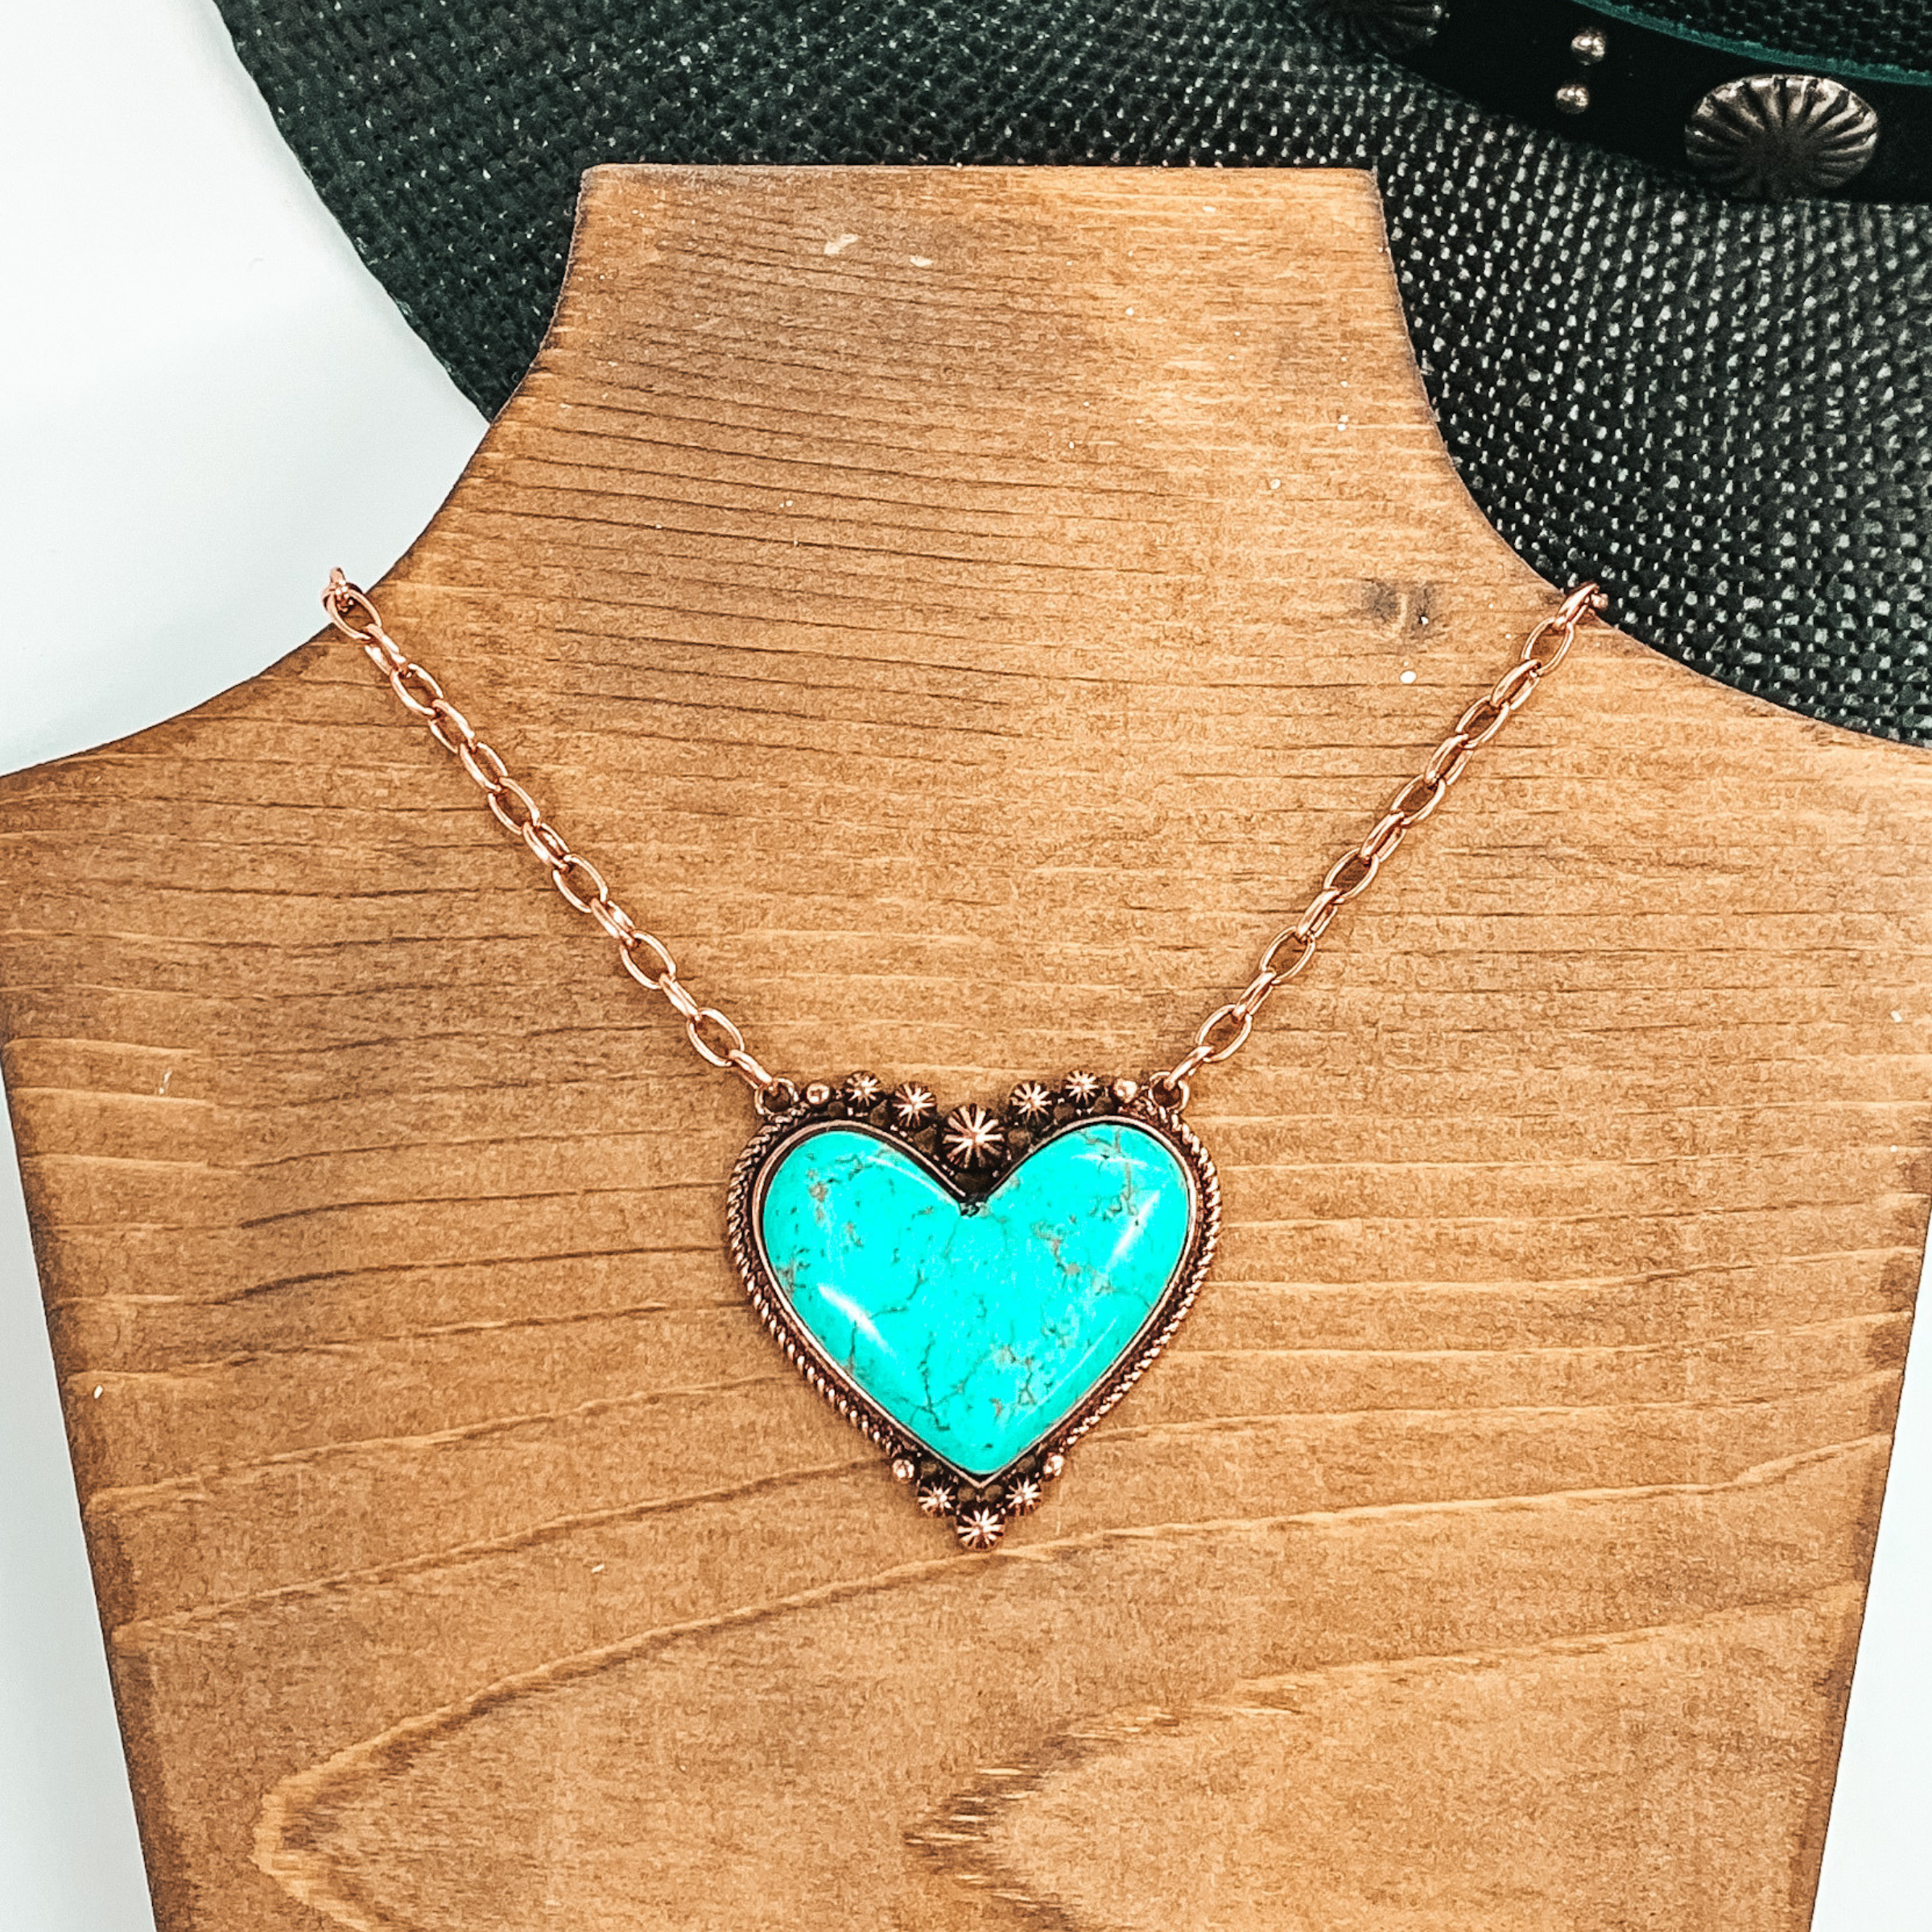 Copper chained necklace with a large turquoise, heart shaped stone pendant. This necklace is pictured laying on a brown necklace holder on a white and black background. 